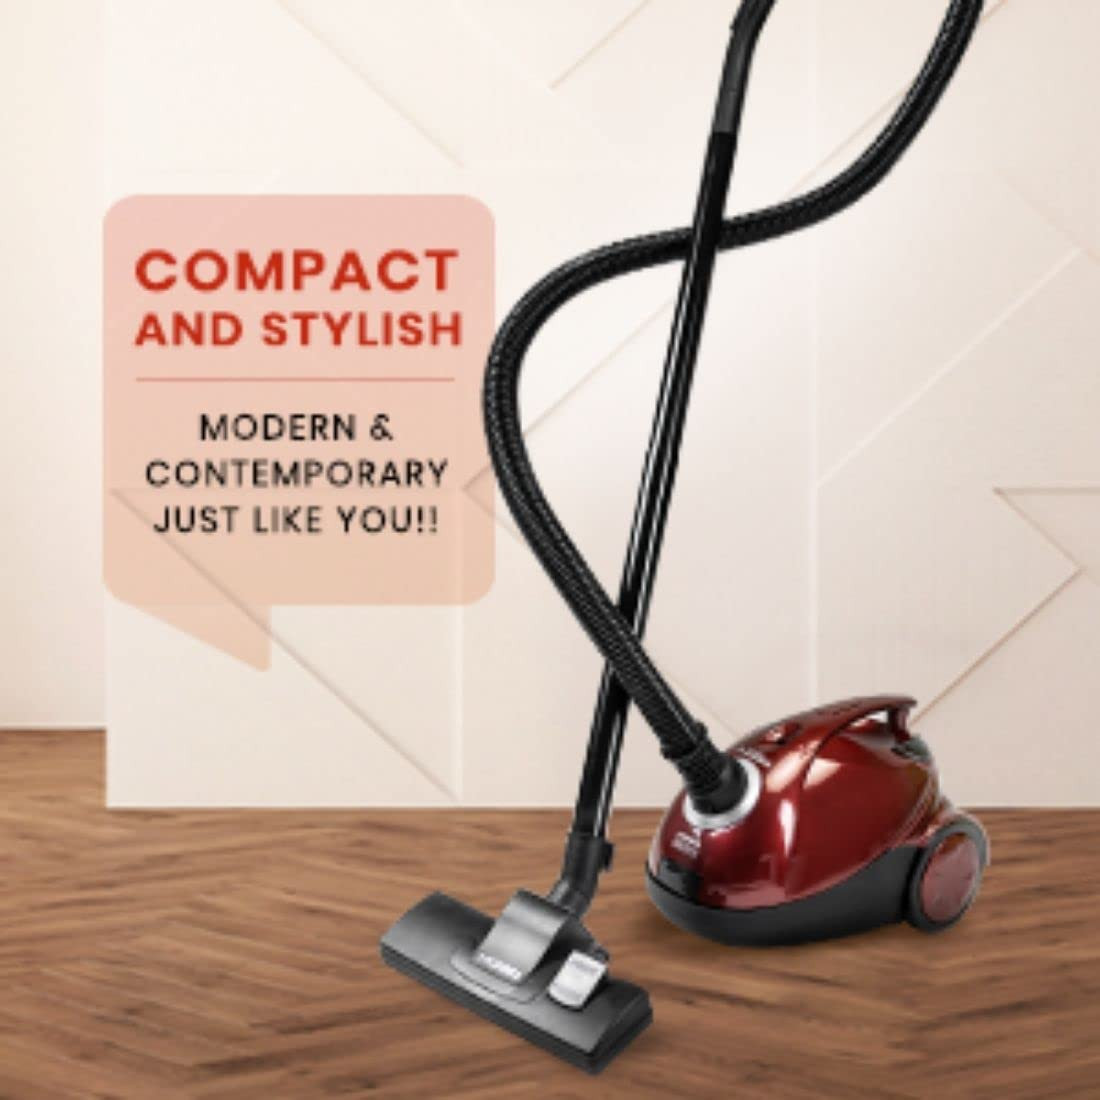 Eureka Forbes Quick Clean DX Vacuum Cleaner with 1200 Watts Powerful Suction Control 3 Free Reusable dust Bag worth Rs 500 comes with multiple accessories dust bag full indicator Red standerd